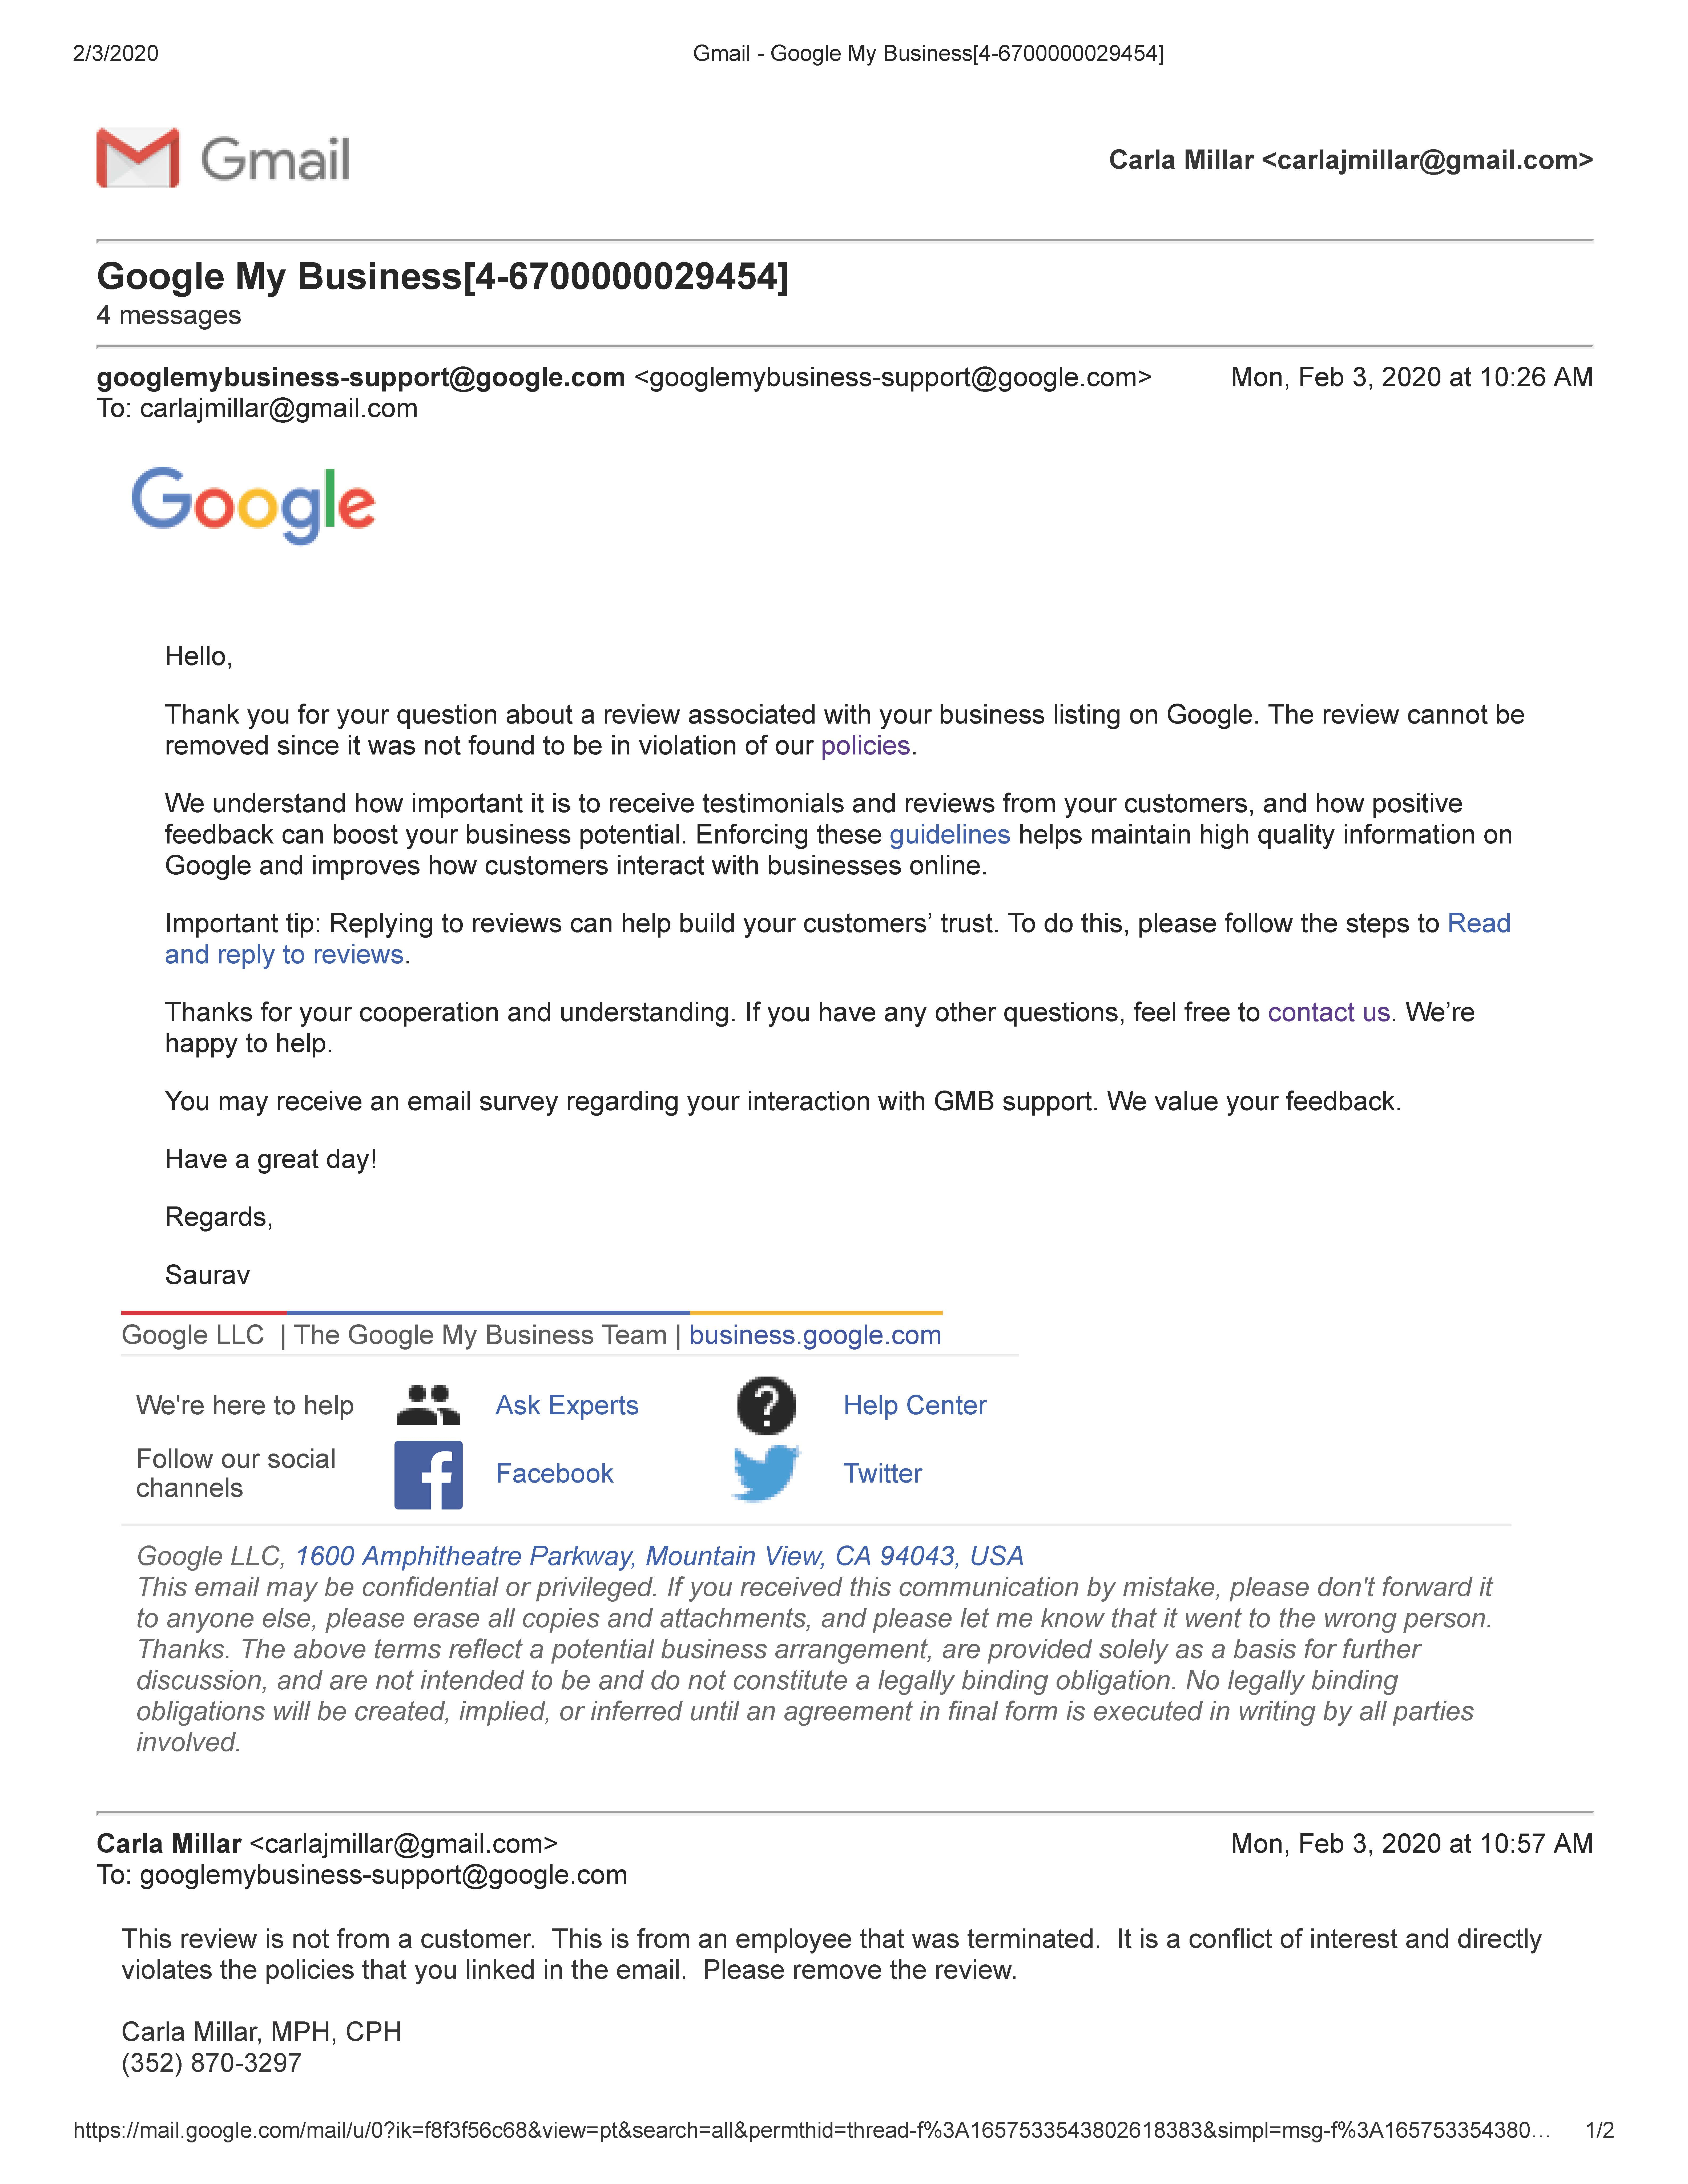 Ex-Employee Posted Review - Google Business Profile Community for Google W2 Former Employee